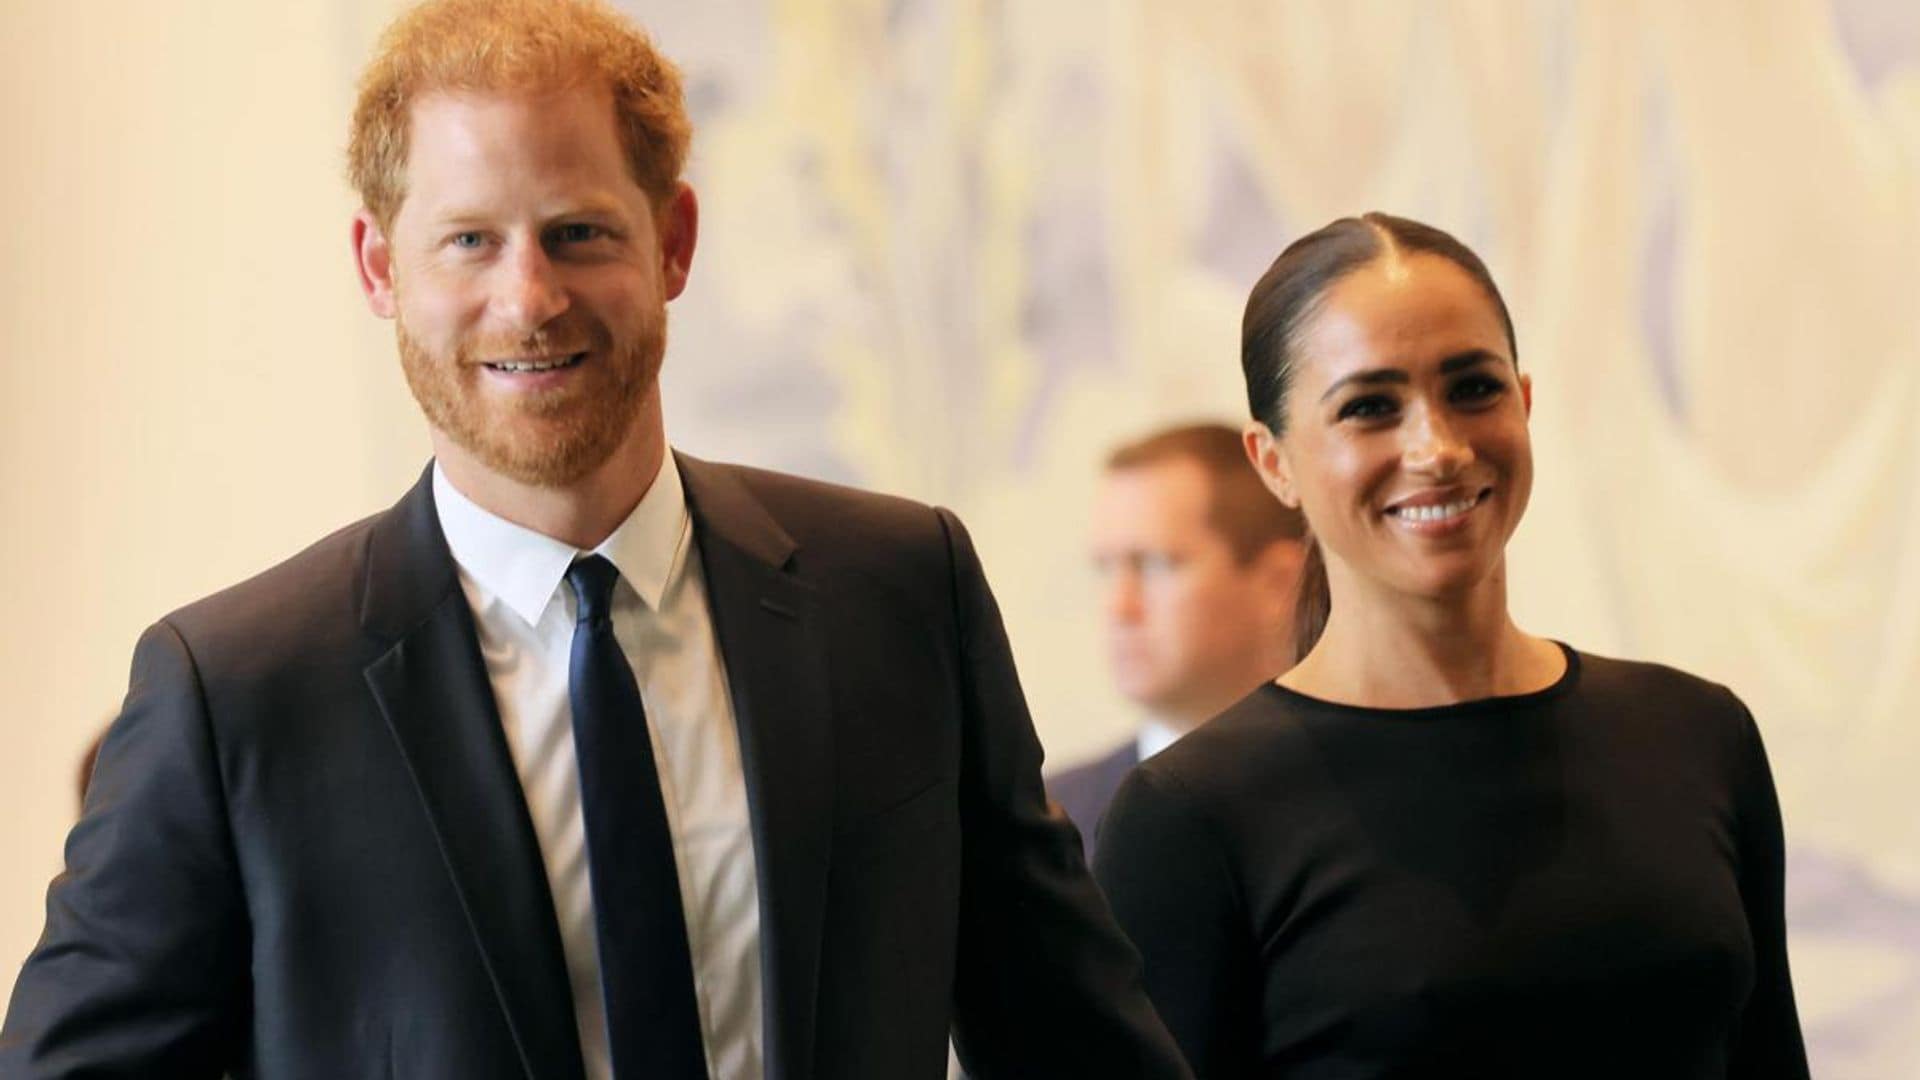 Meghan Markle and Prince Harry to be honored at NYC benefit